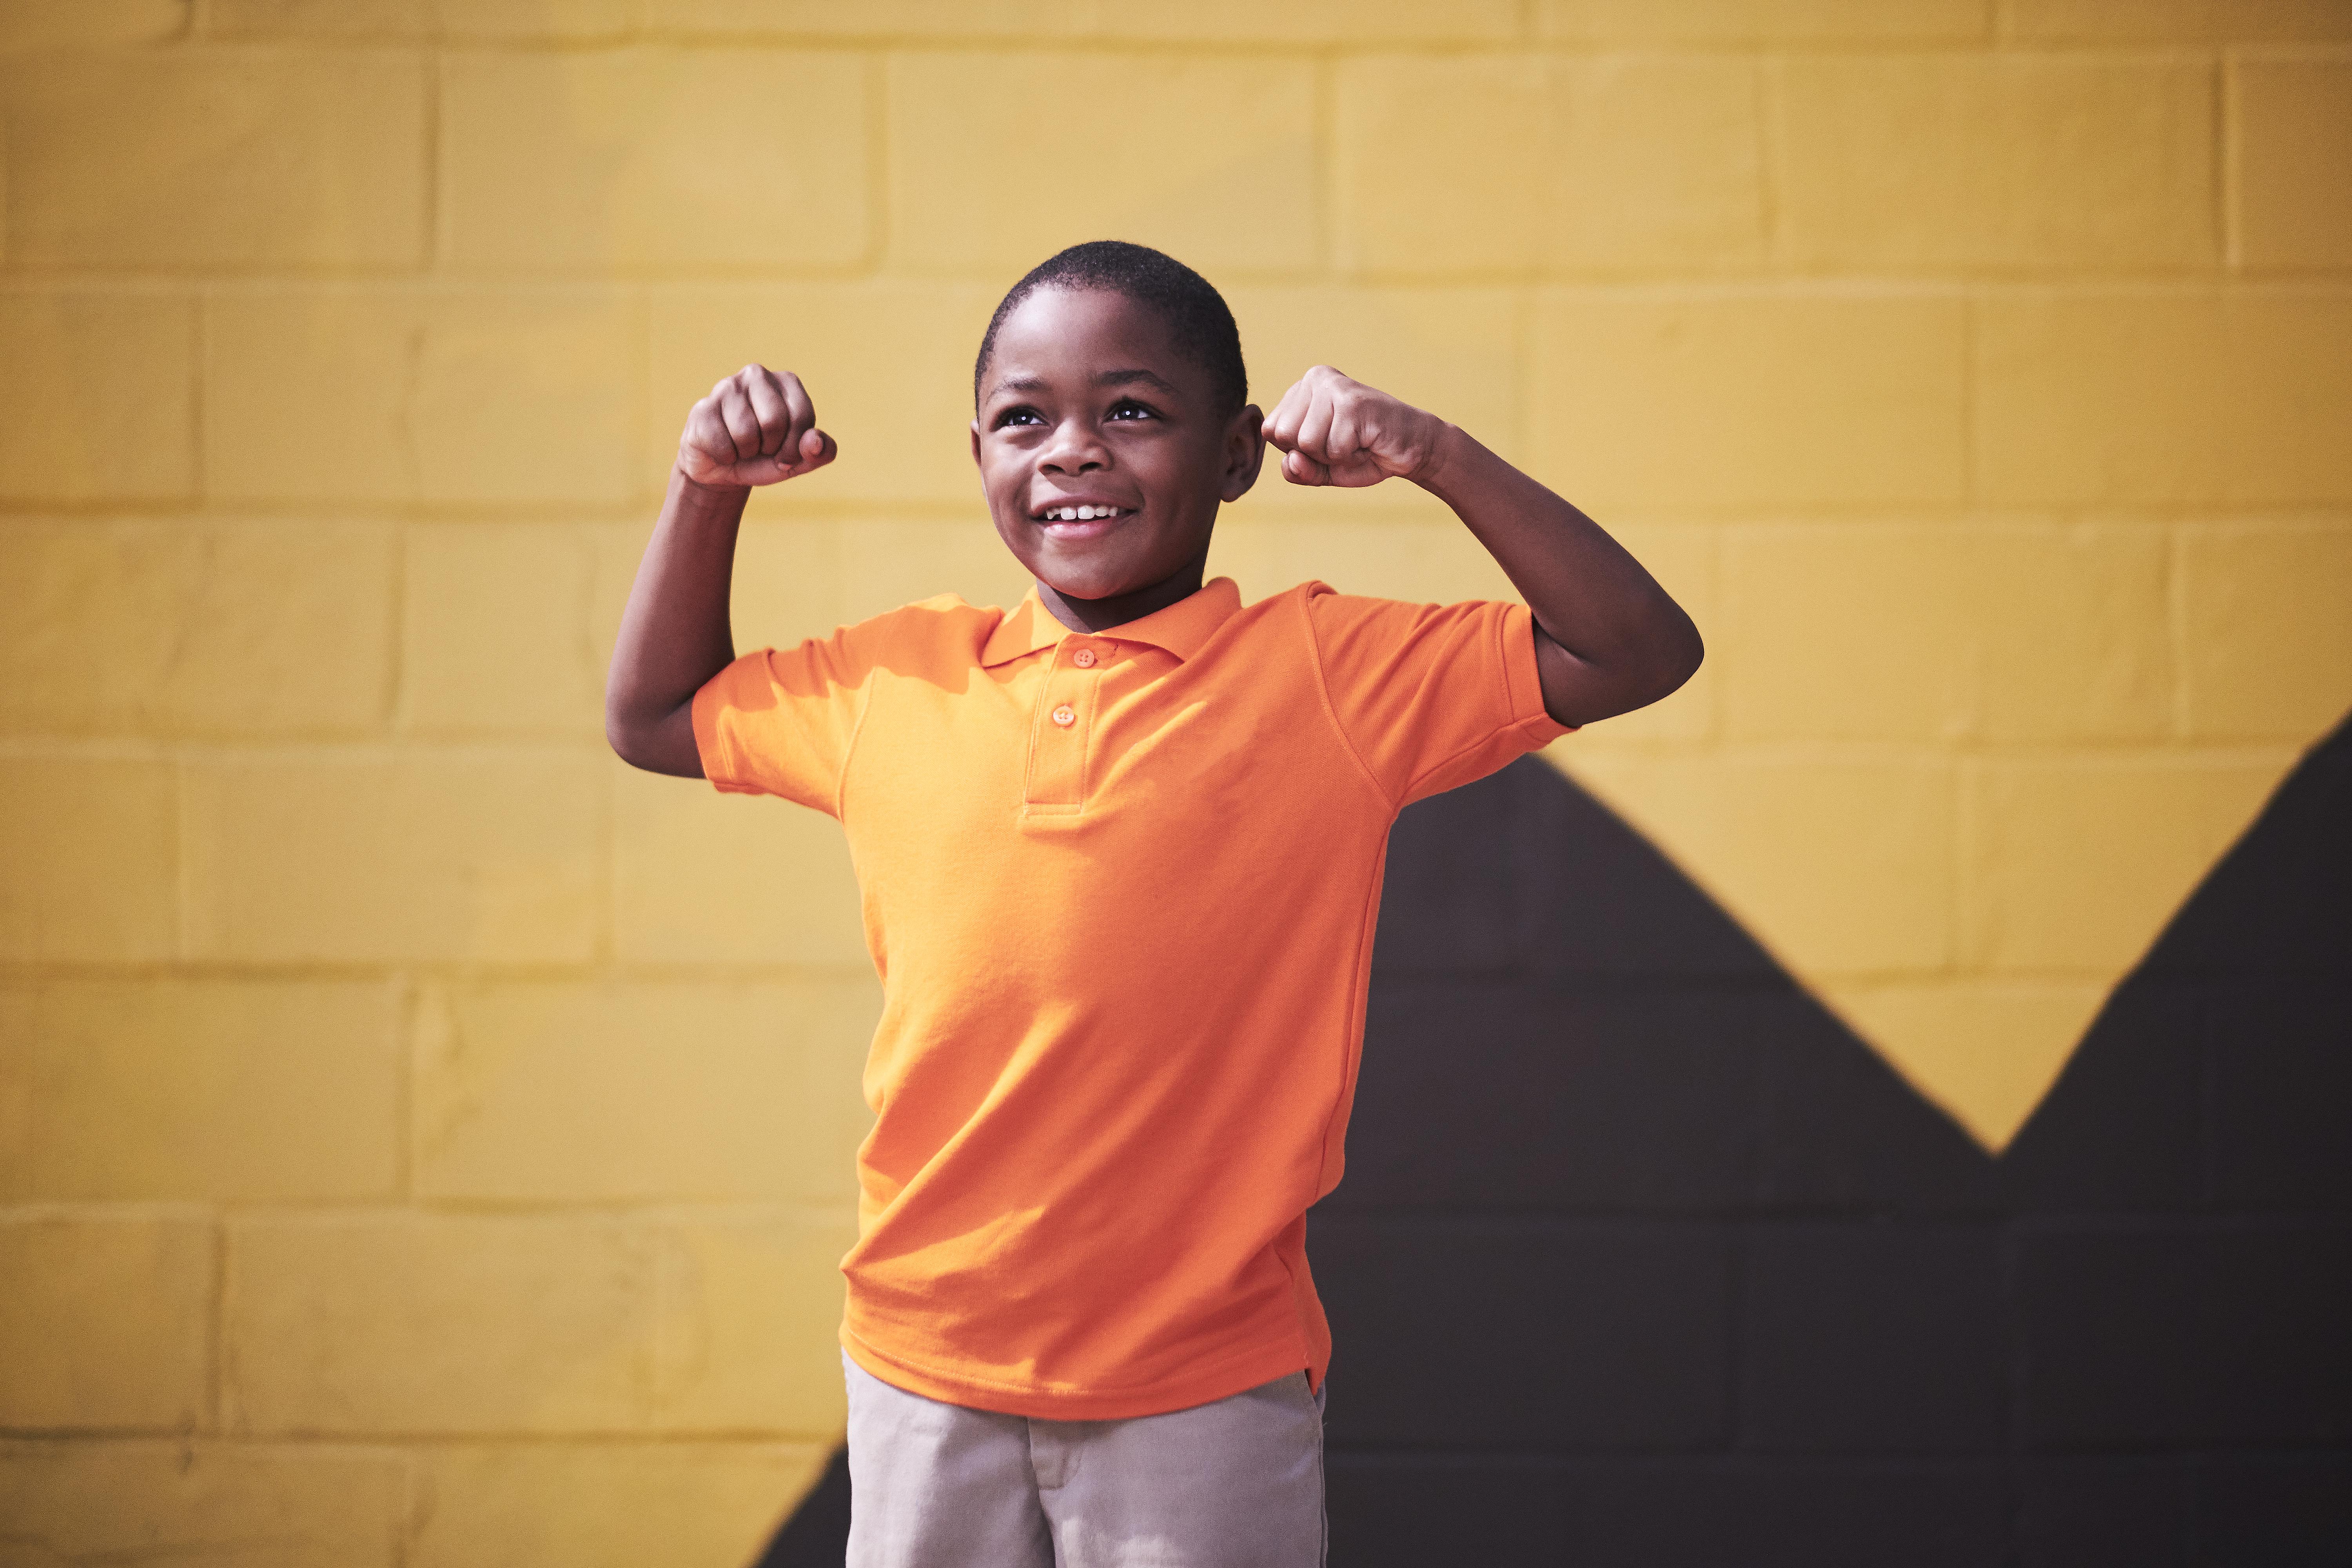 A young Black boy wears an orange shirt and smiles, flexing his arms.